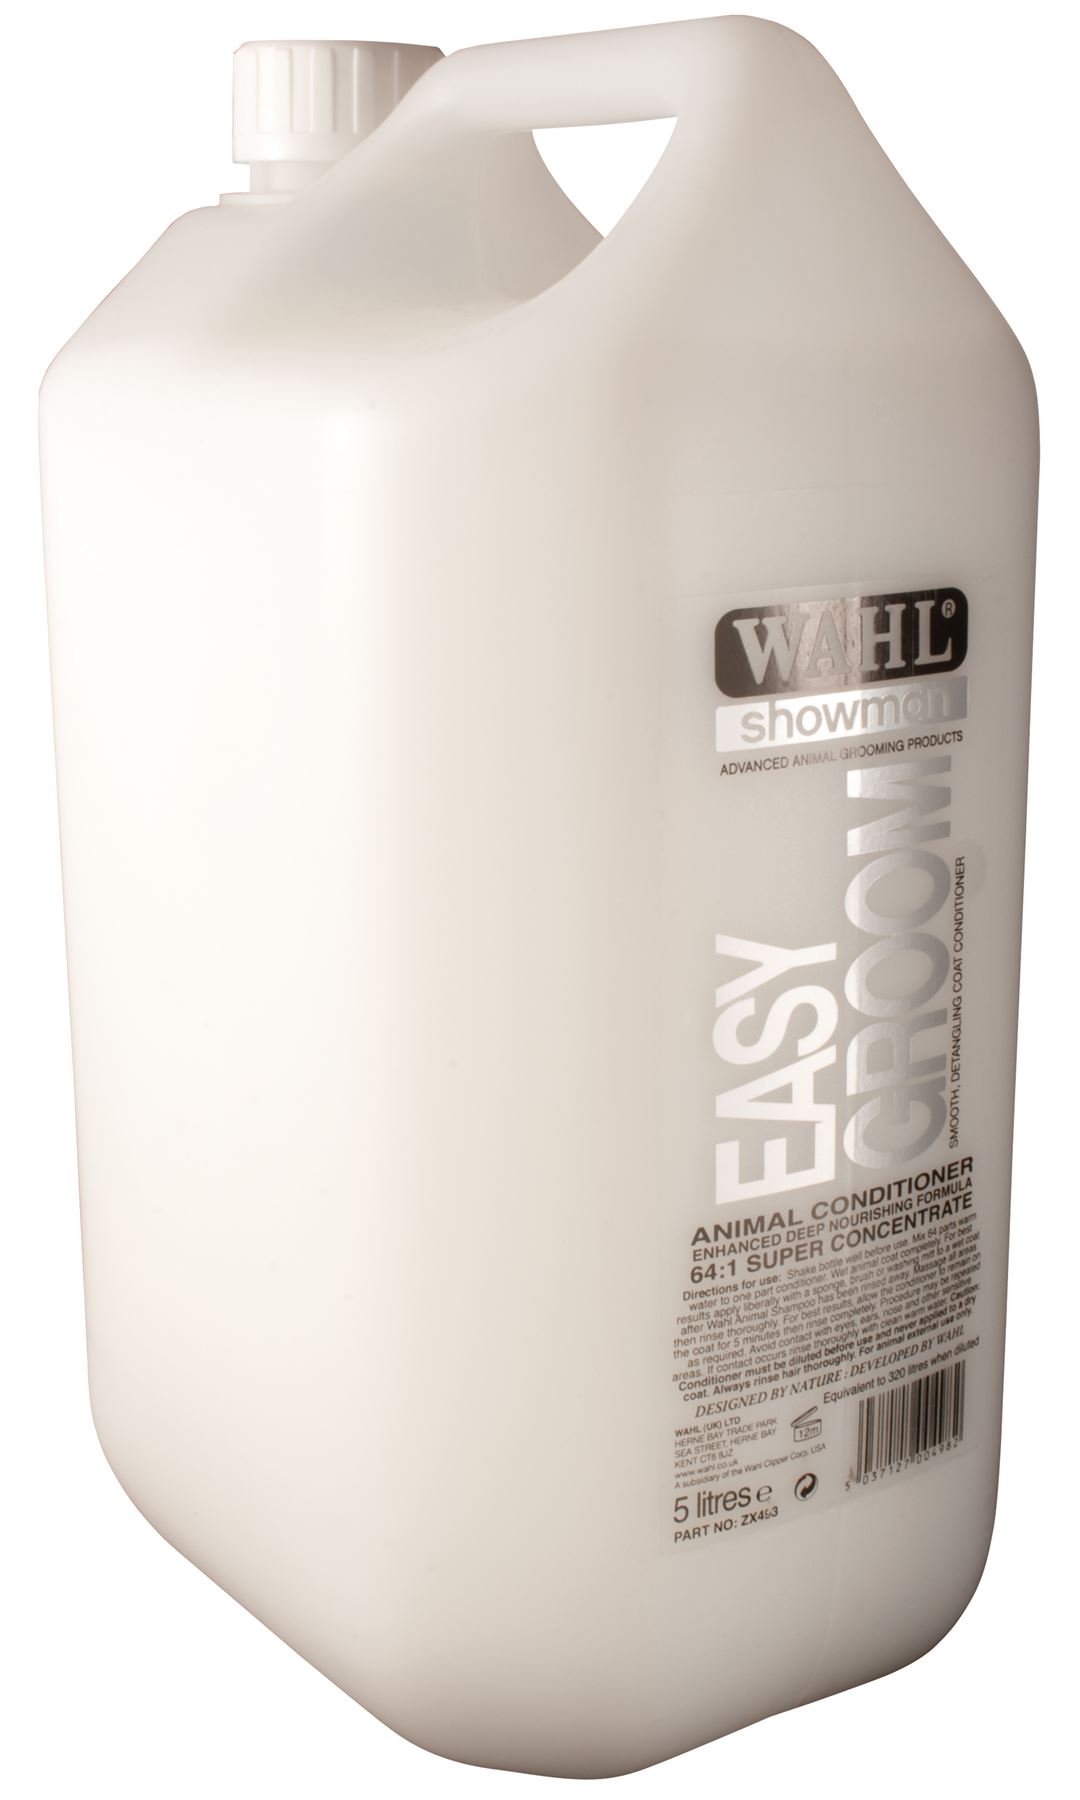 Wahl Showman Easy Groom Conditioner - Just Horse Riders